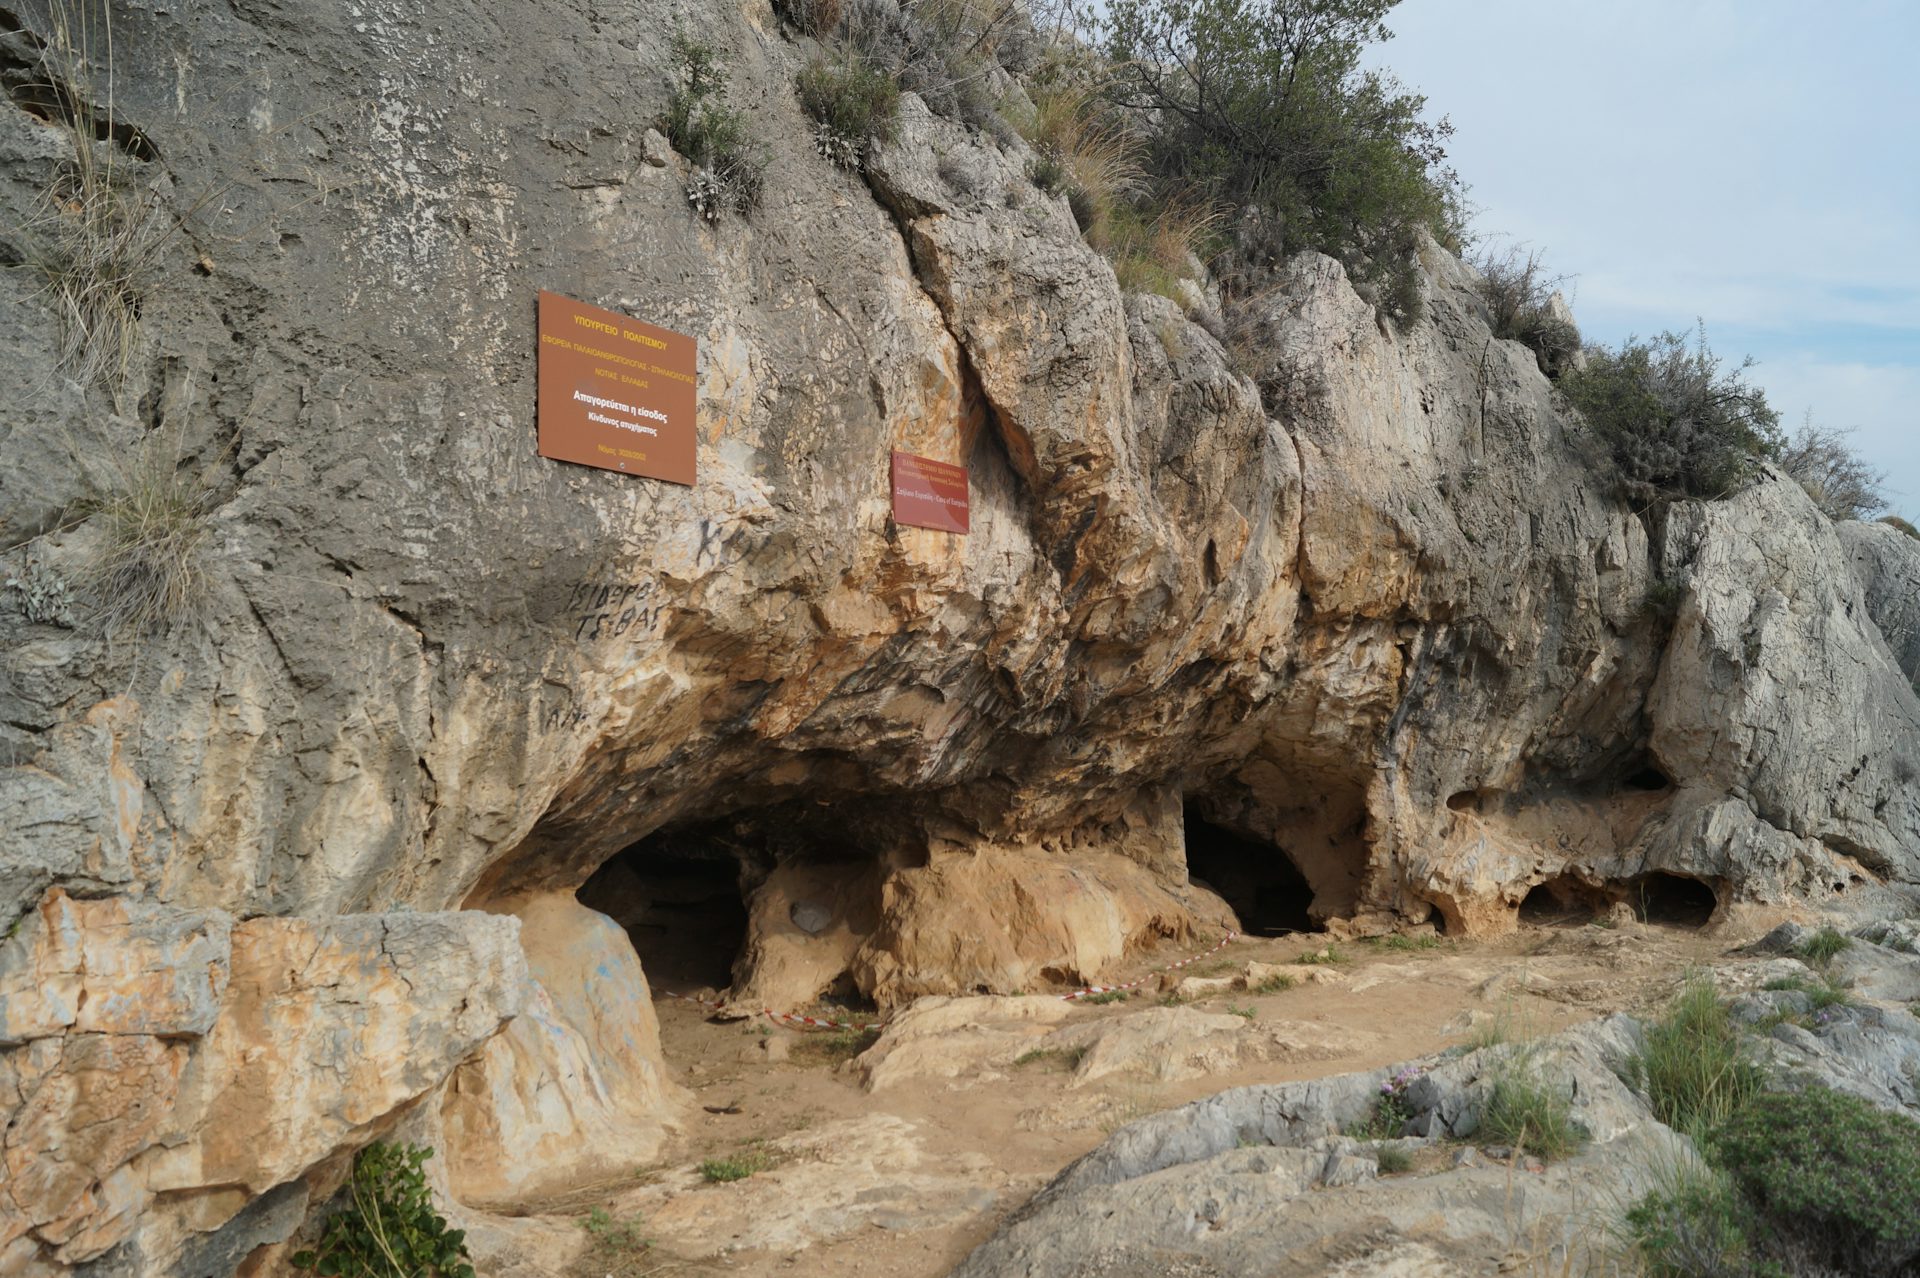 The "Cave of Euripides" on Salamis